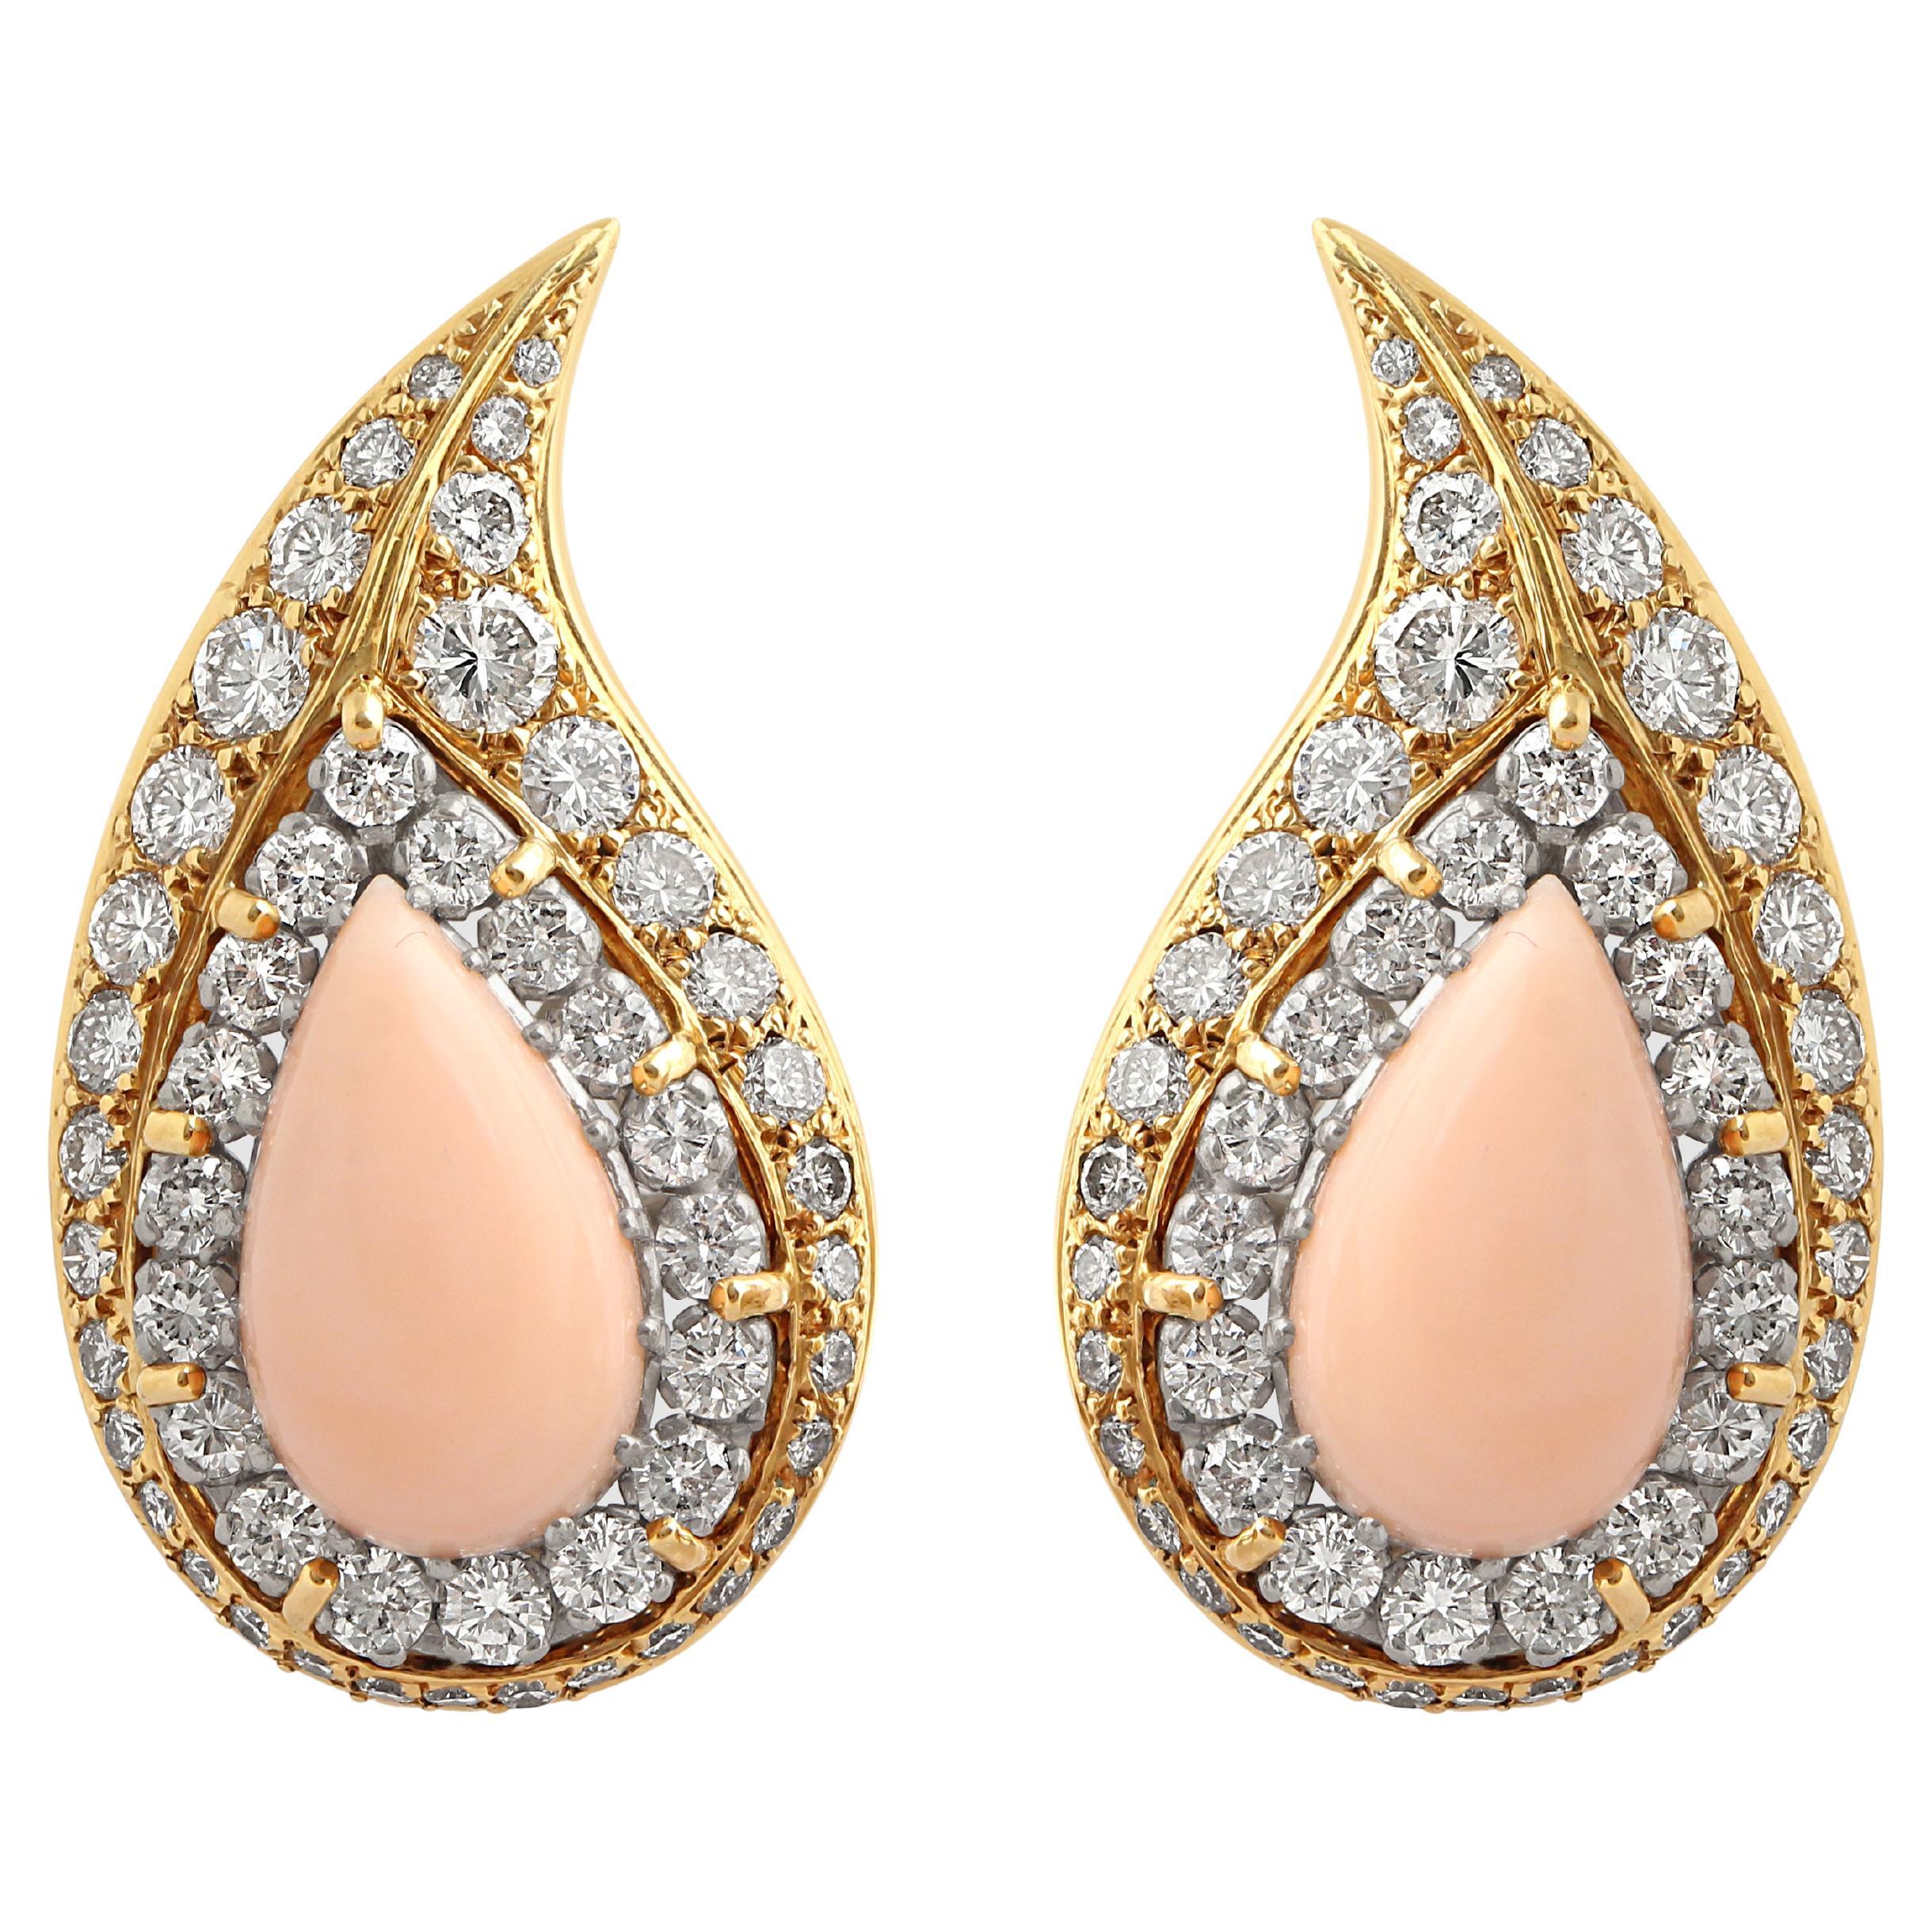 A Pair of Gold, Diamond & Coral Earrings